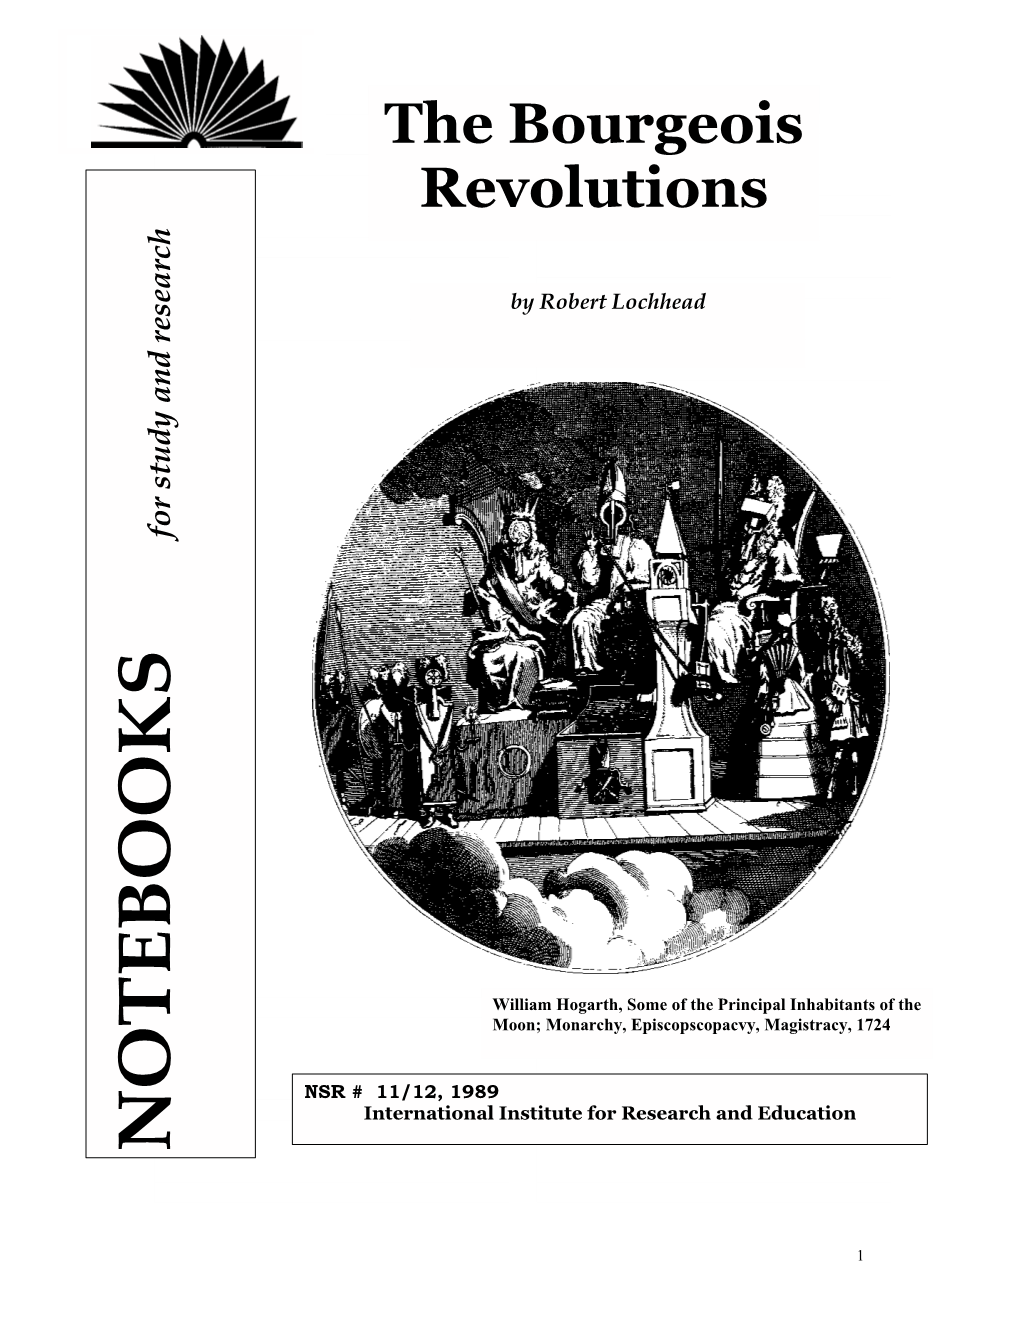 The Bourgeois Revolutions, Their Diversity As Regressive Trends at Work in Post-Capitalist States